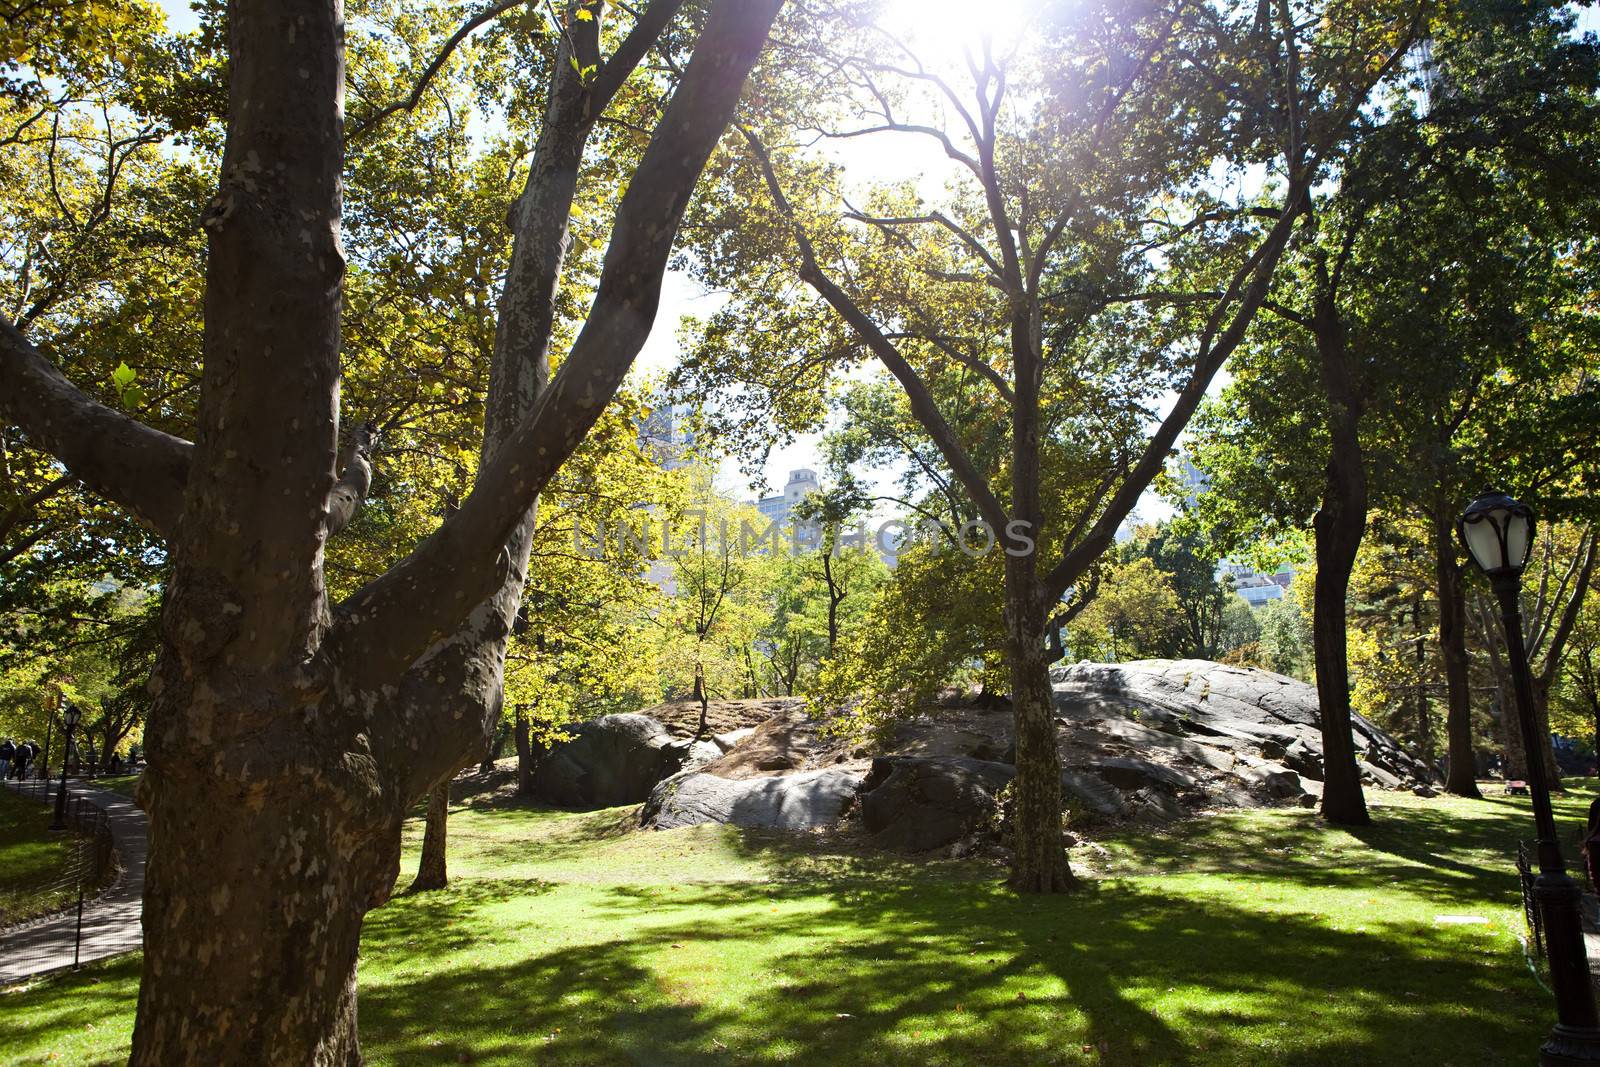 The famous rocks of Central Park in New York City during early fall near the Colombus Circle end. Slight lens flare on the sunlight through the trees.